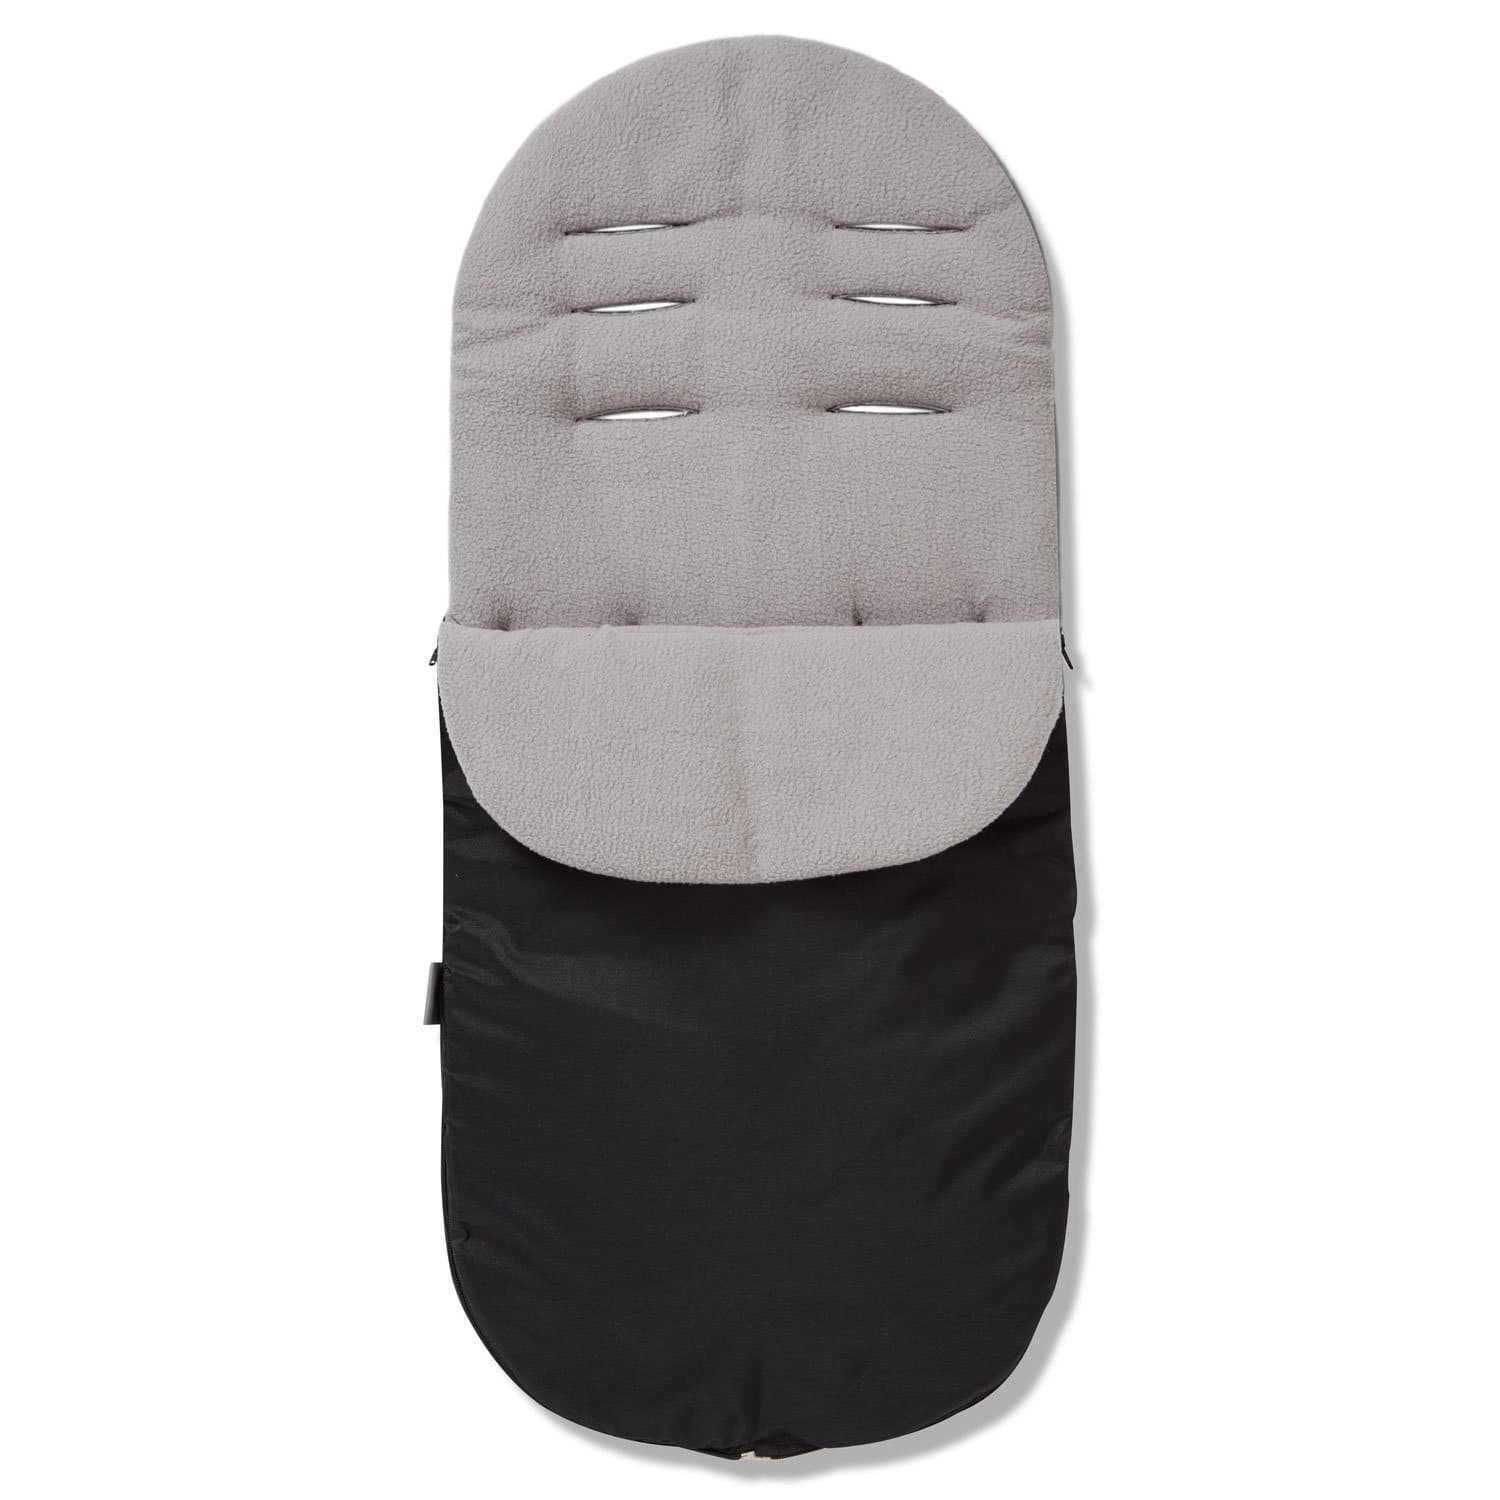 Footmuff / Cosy Toes Compatible with Zooper - Grey / Fits All Models | For Your Little One